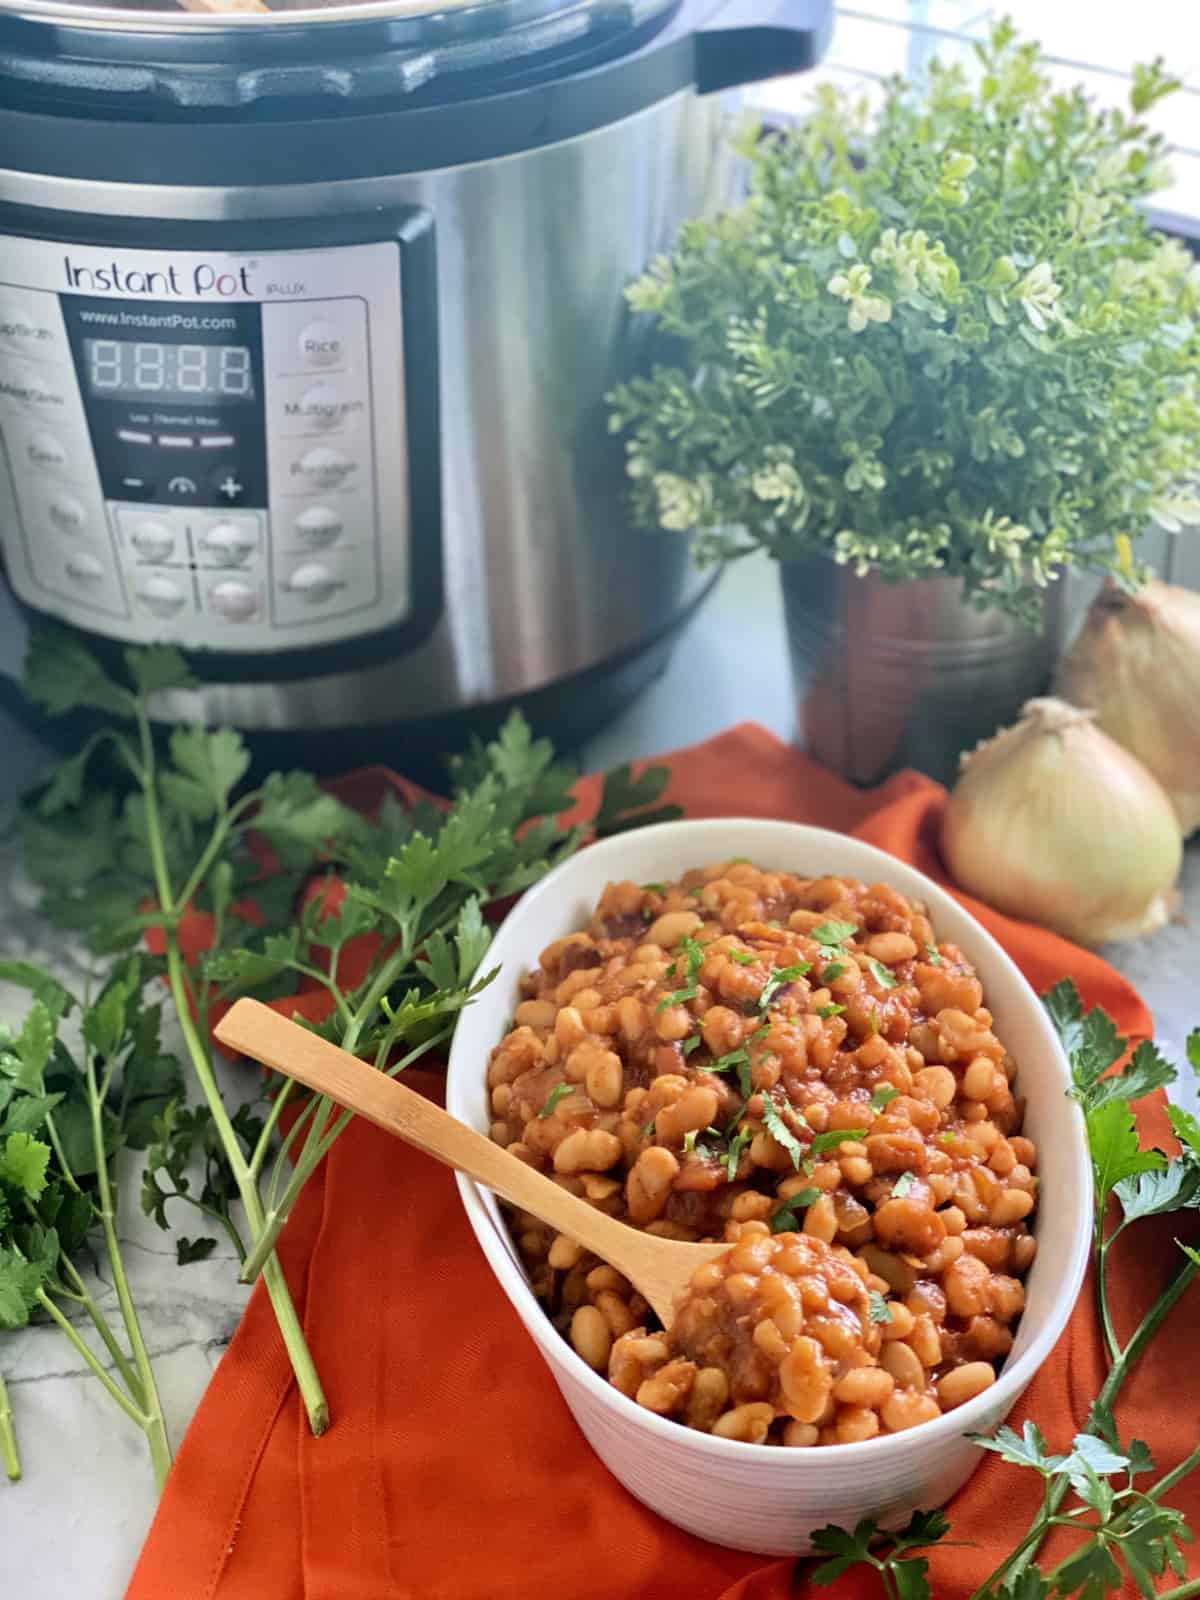 Oval bowl of baked beans on cloth with herbs, onions, and Instant Pot in backgound.